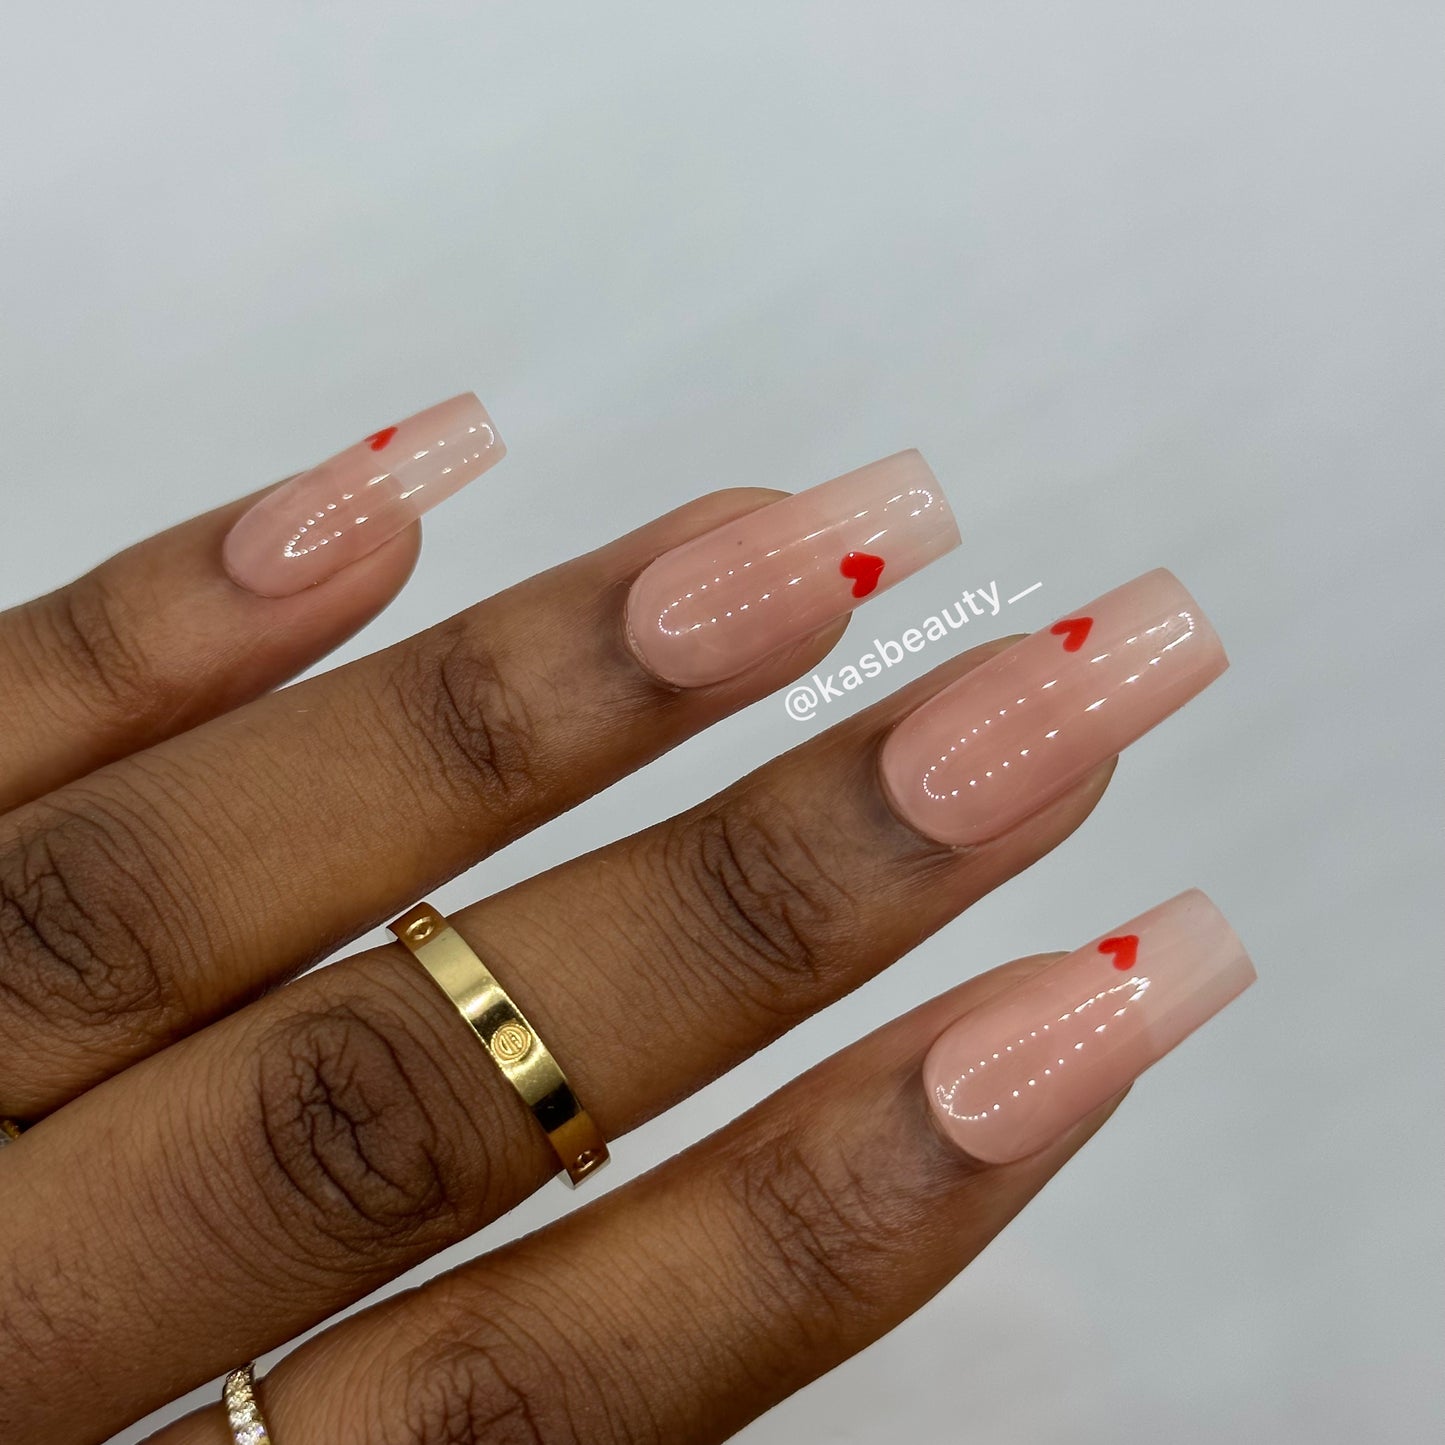 First Love Press On Nails